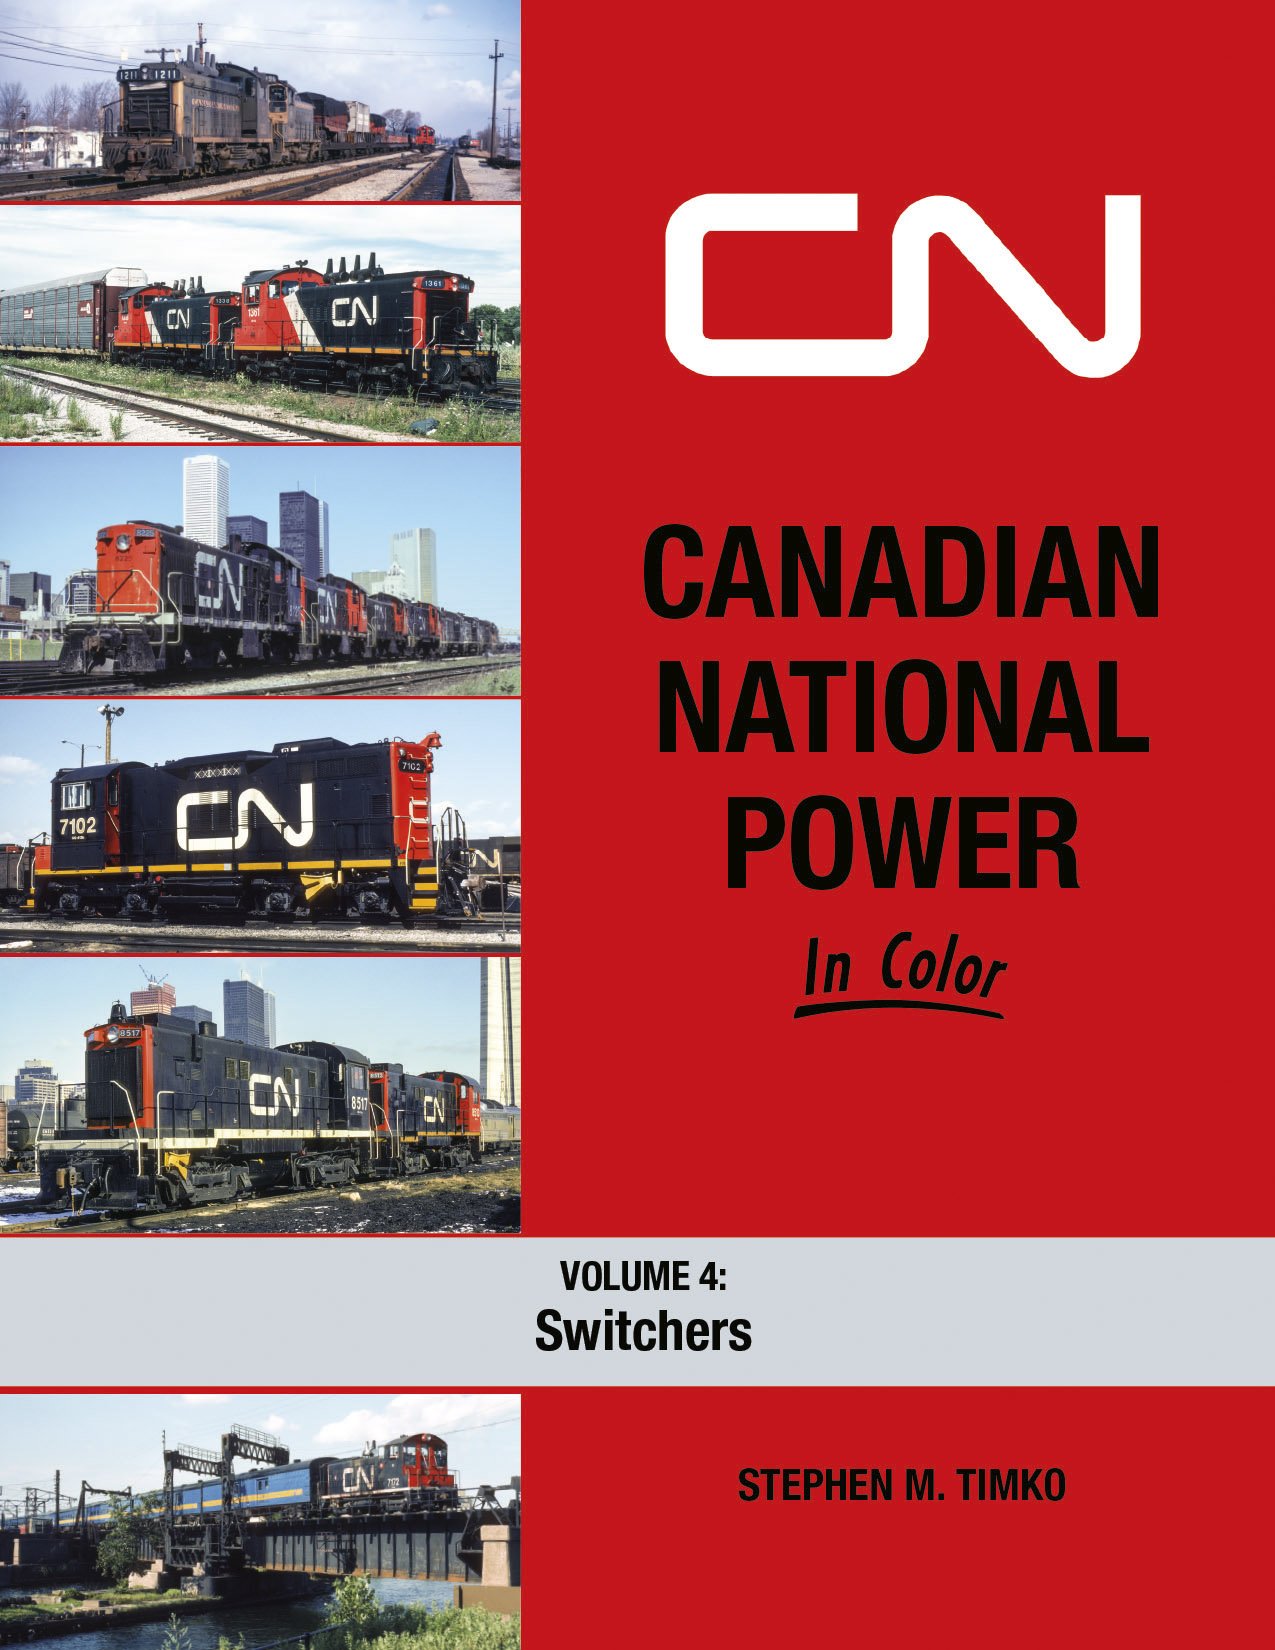 Canadian National Power, Vol. 4